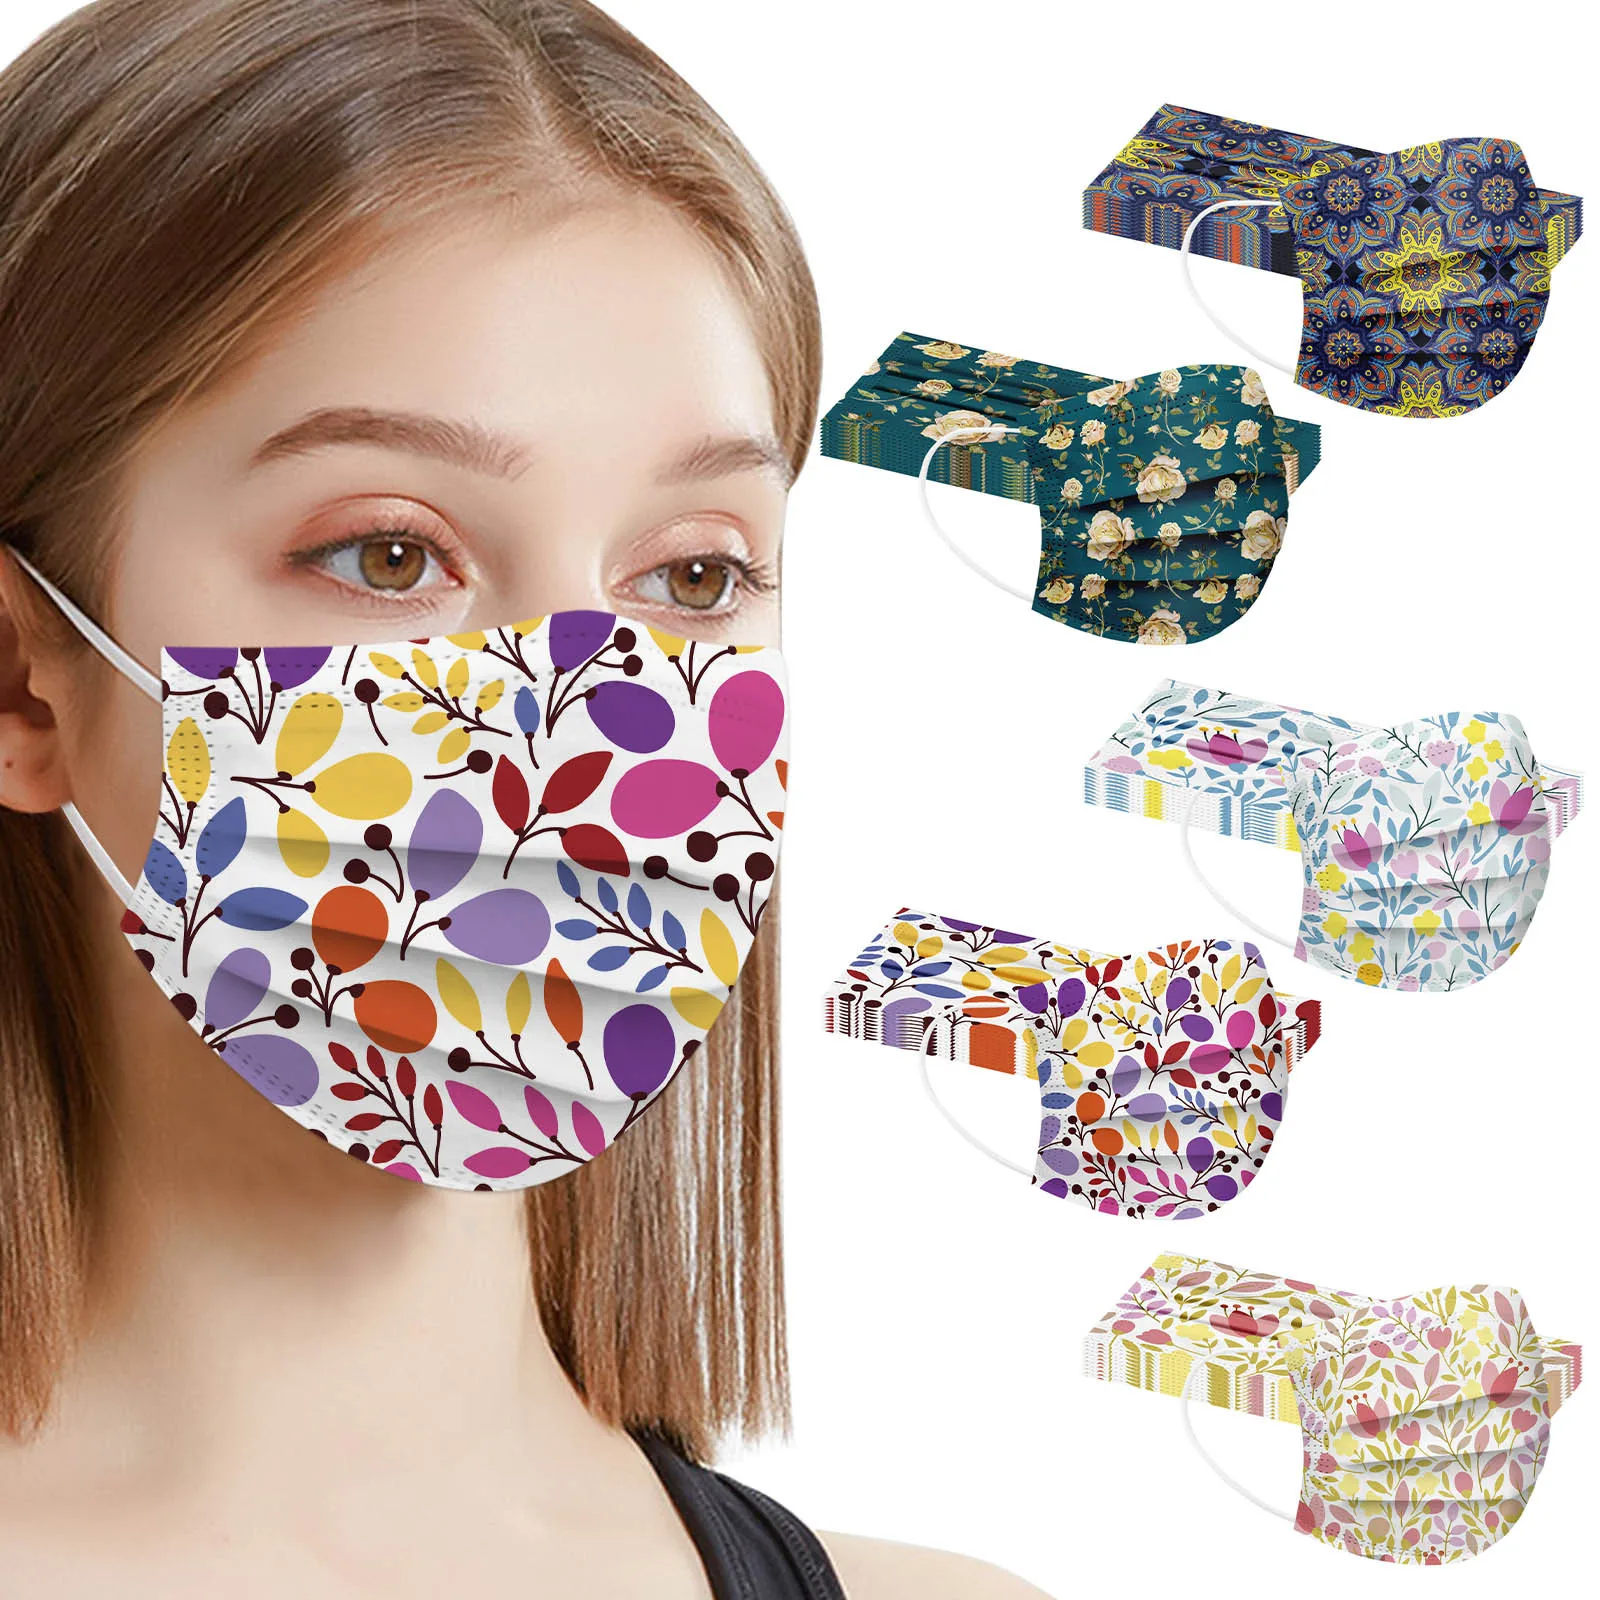 

10PCS Adult Fashion Print Mask Non Woven Man Women Outdoor Prevention Disposable Face Mask Industrial 3 Ply Ear Loop Cosplay